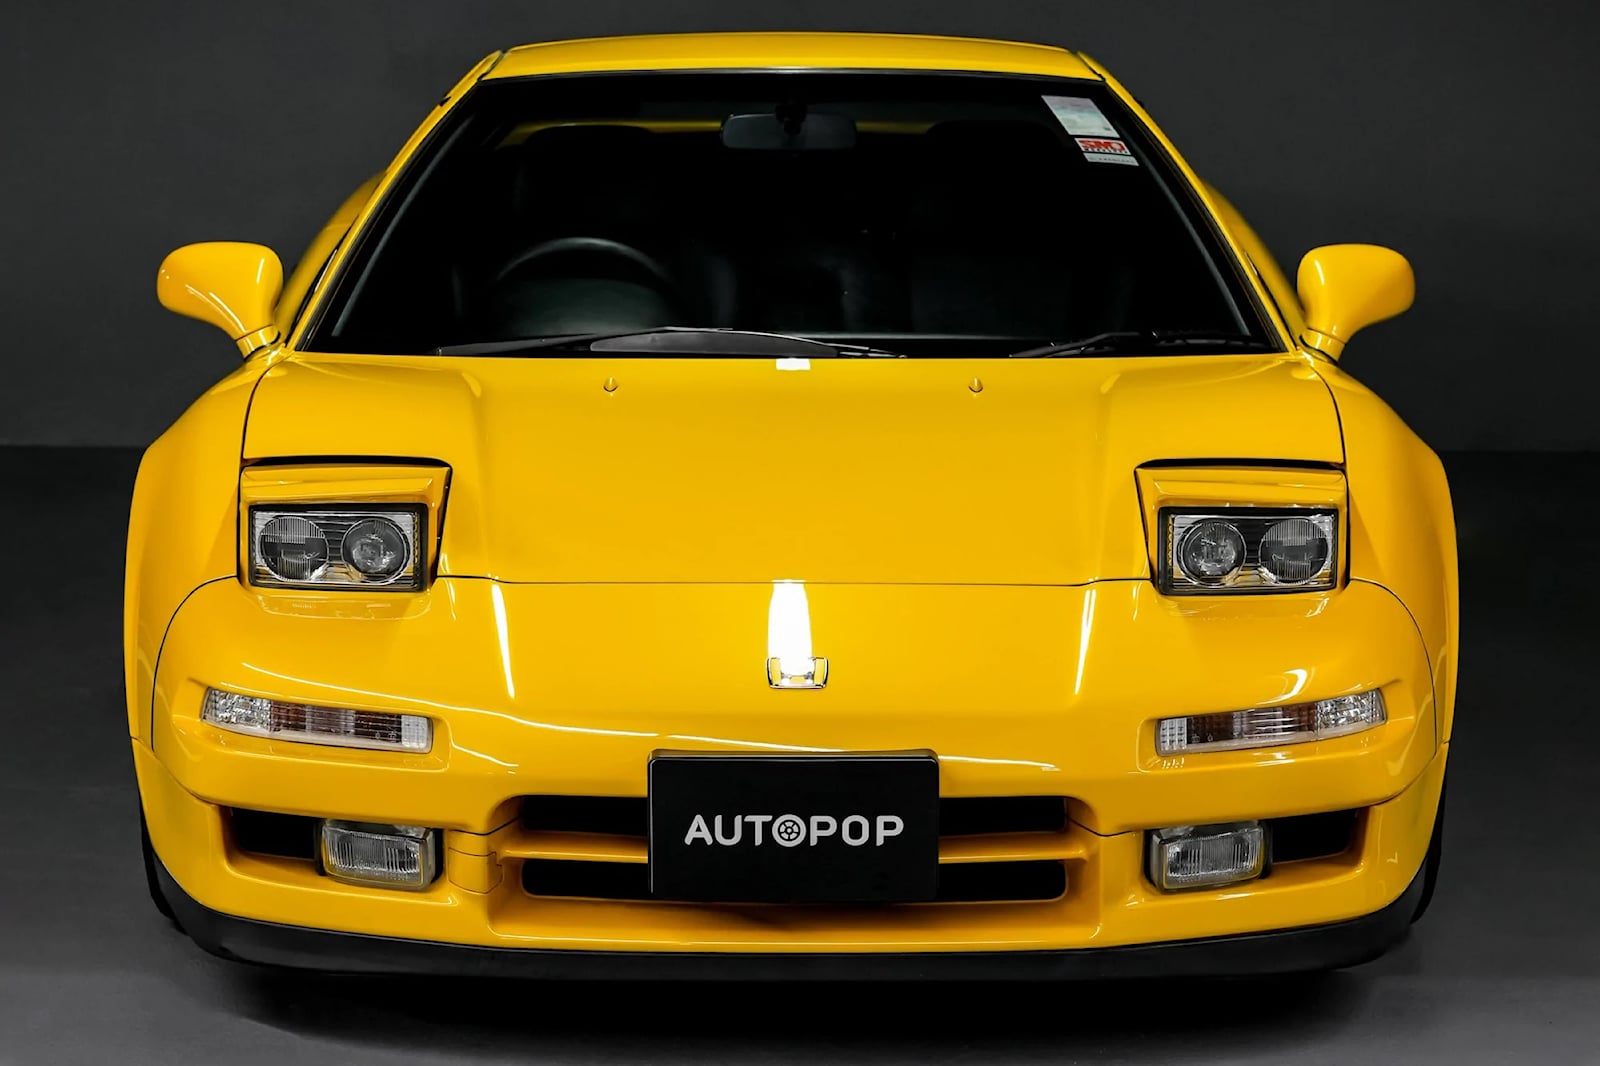 15 coolest pop-up headlights that flipped our minds – AE86, RX-7